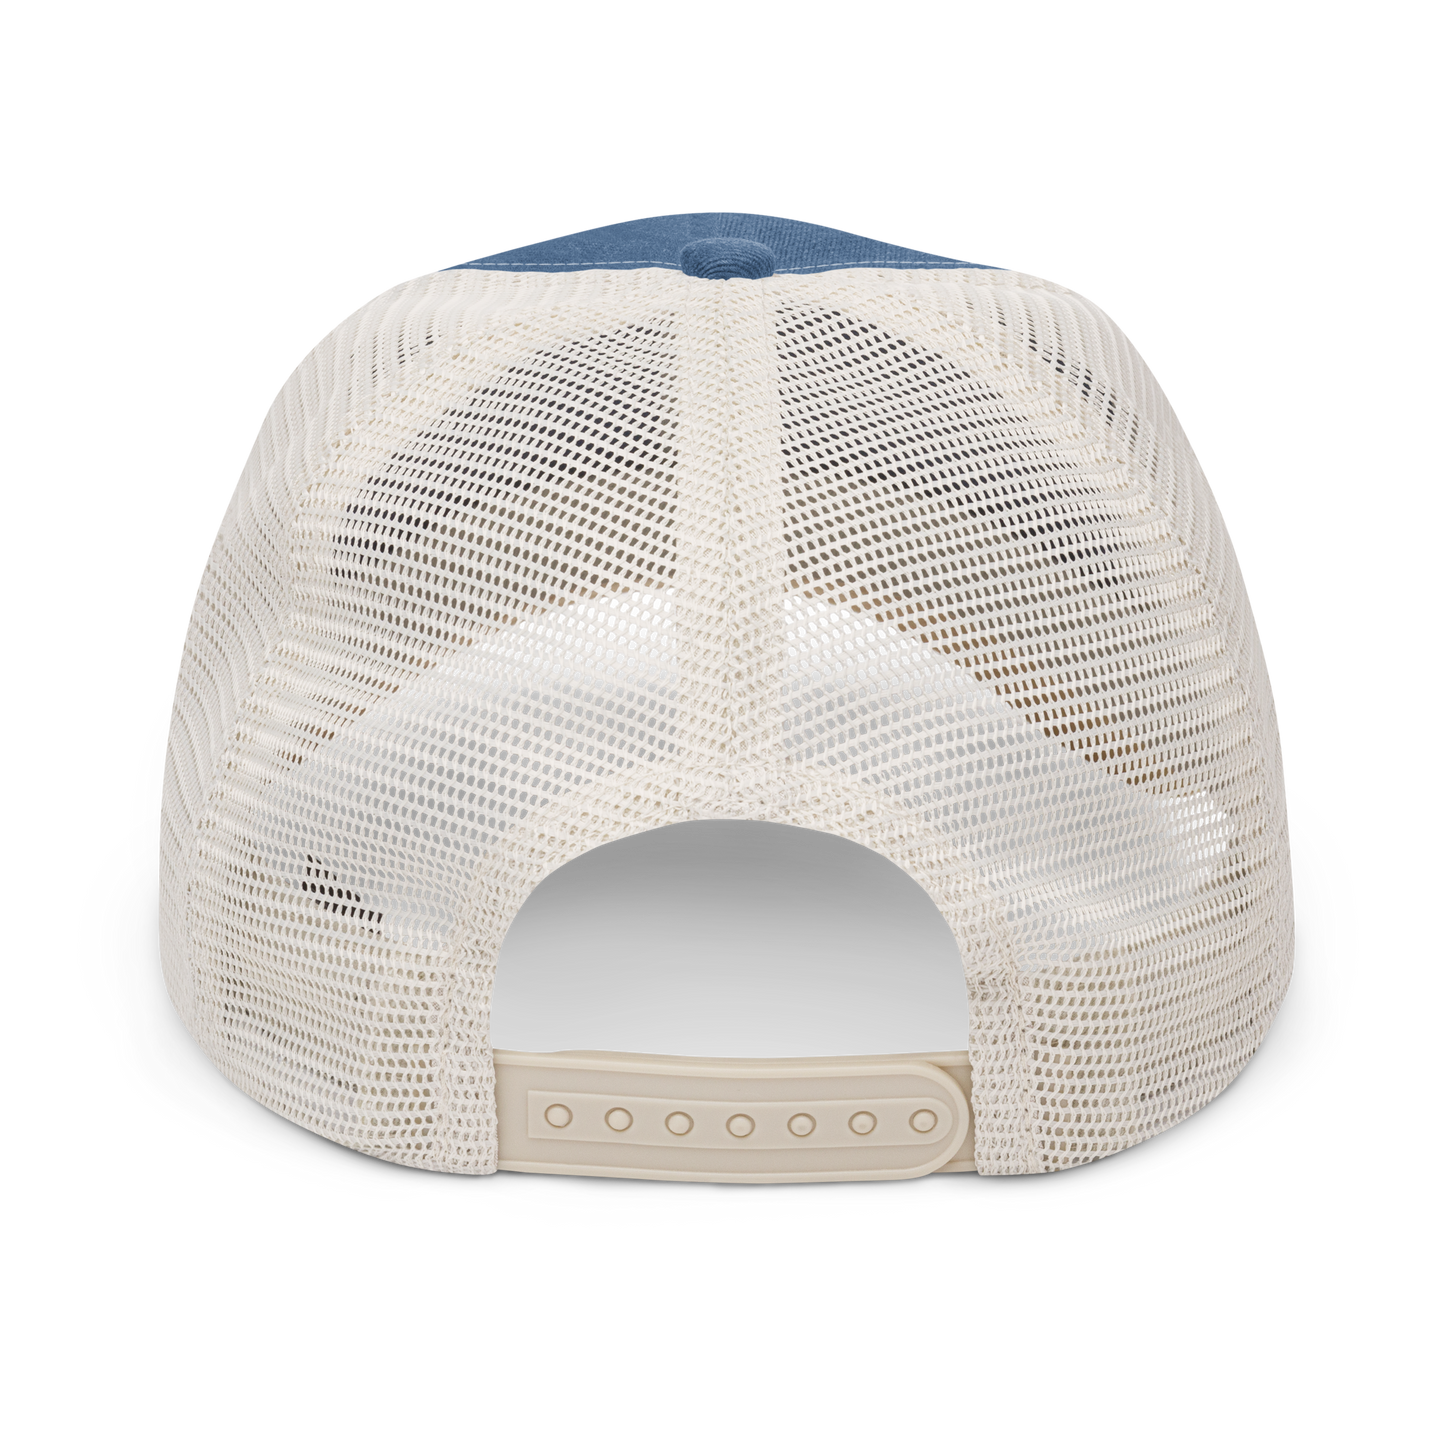 YHM Designs - YQG Windsor Pigment-Dyed Trucker Cap - Crossed-X Design with Airport Code and Vintage Propliner - White Embroidery - Image 19